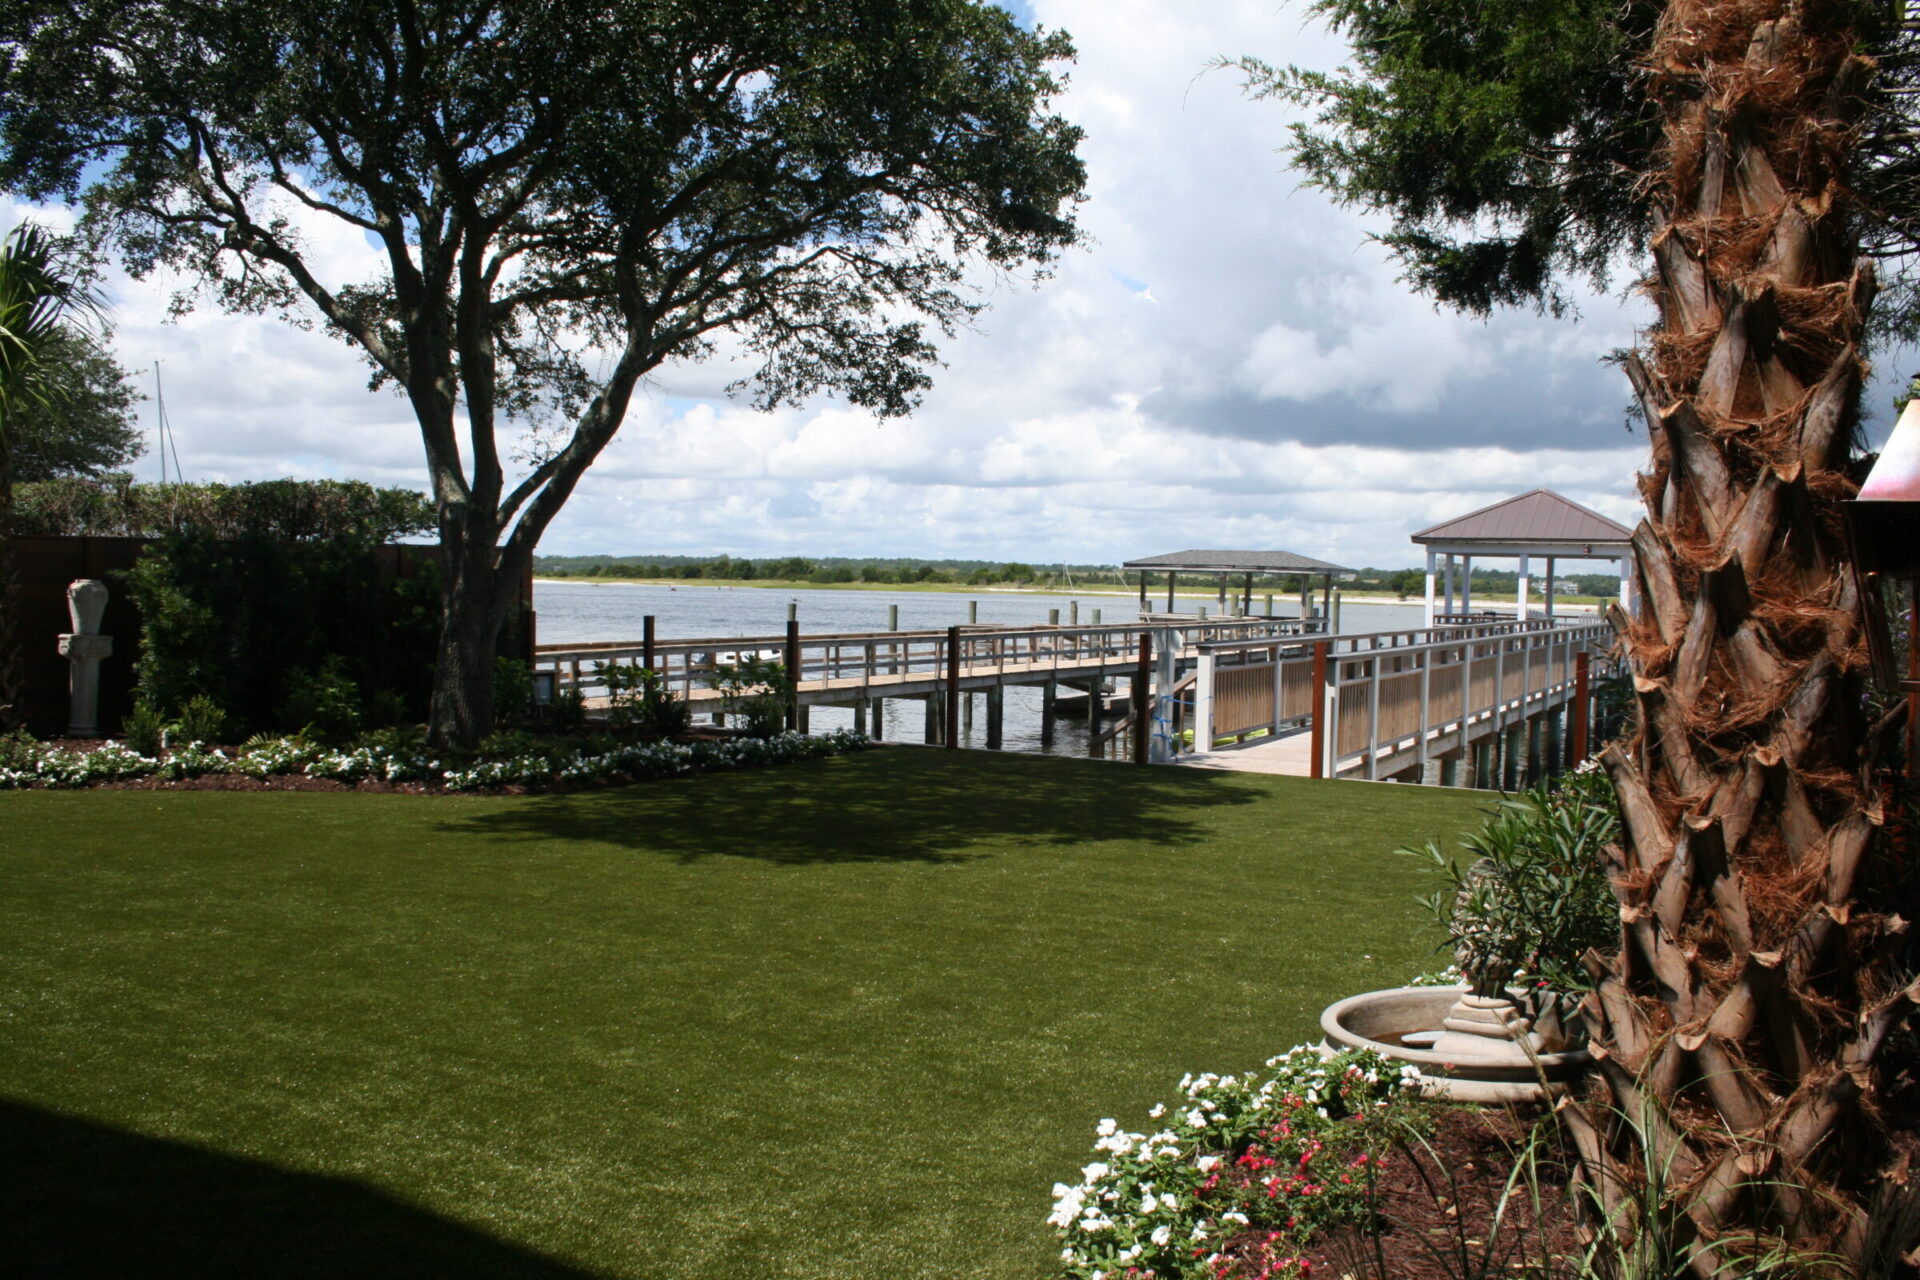 This image shows a lush garden with artificial turf, a large tree, and a wooden dock extending into a tranquil water body, with a cloudy blue sky above.